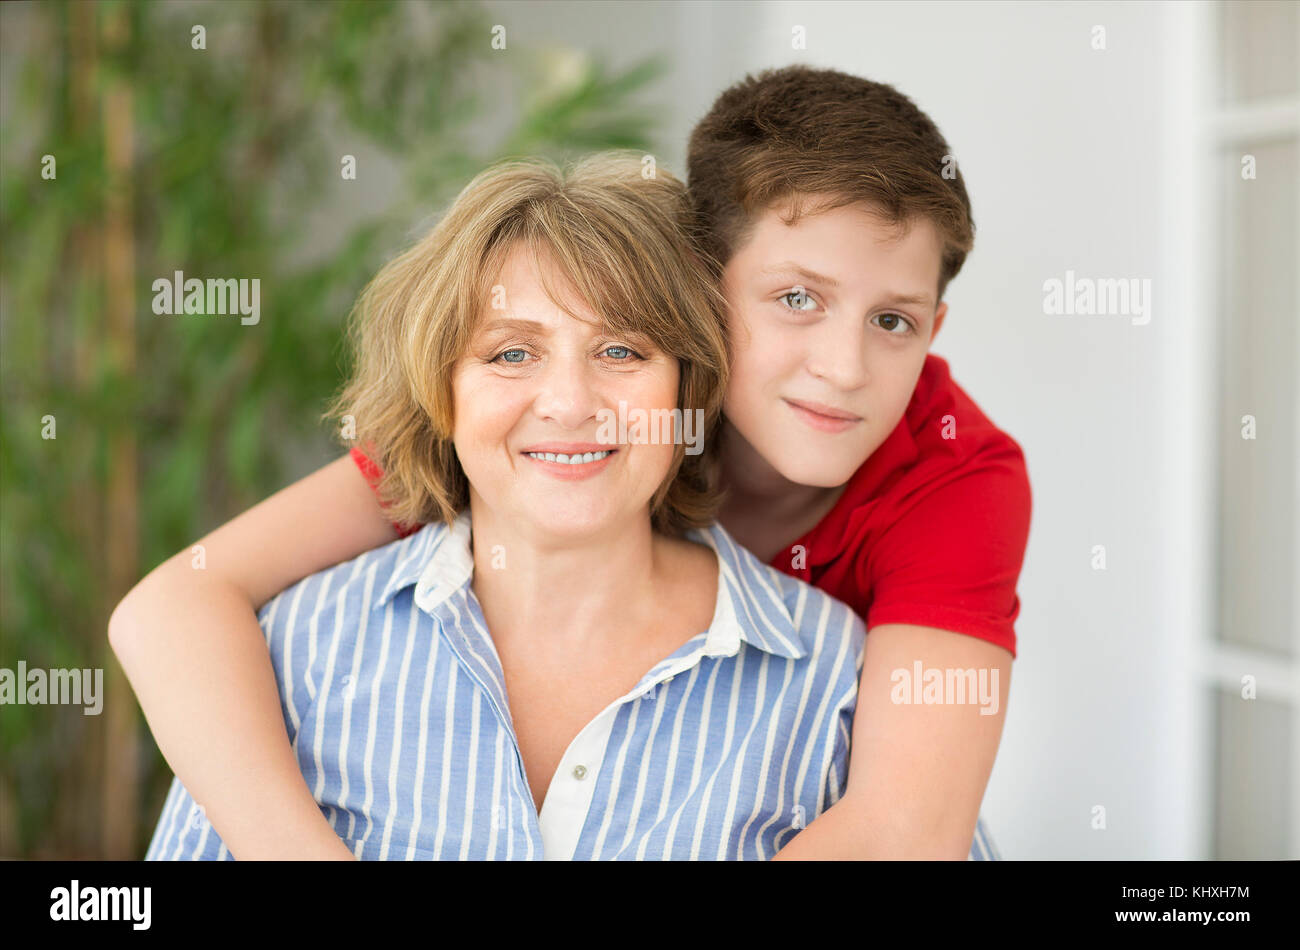 Mid-age woman with teen boy. Happy family concept Stock Photo